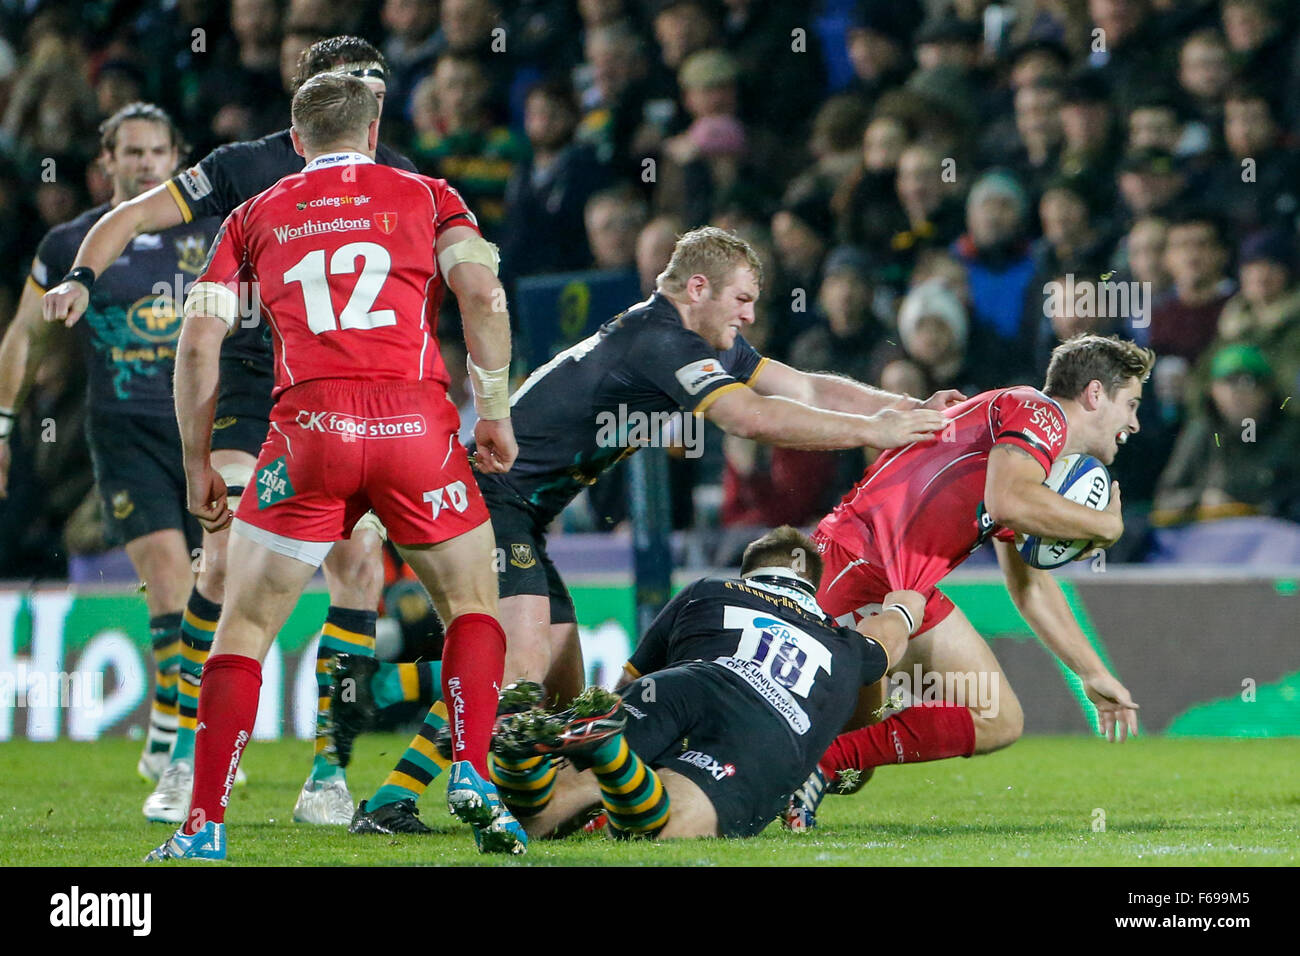 Frankin Gardens, Northampton, UK. 14th Nov, 2015. European Rugby Champions Cup. Northampton Saints versus Scarlets. Aled Thomas of Scarlets is tackled by Ethan Waller and JJ Hanrahan of Northampton Saints. Final score: Northampton Saints 15-11 Scarlets. Credit:  Action Plus Sports/Alamy Live News Stock Photo